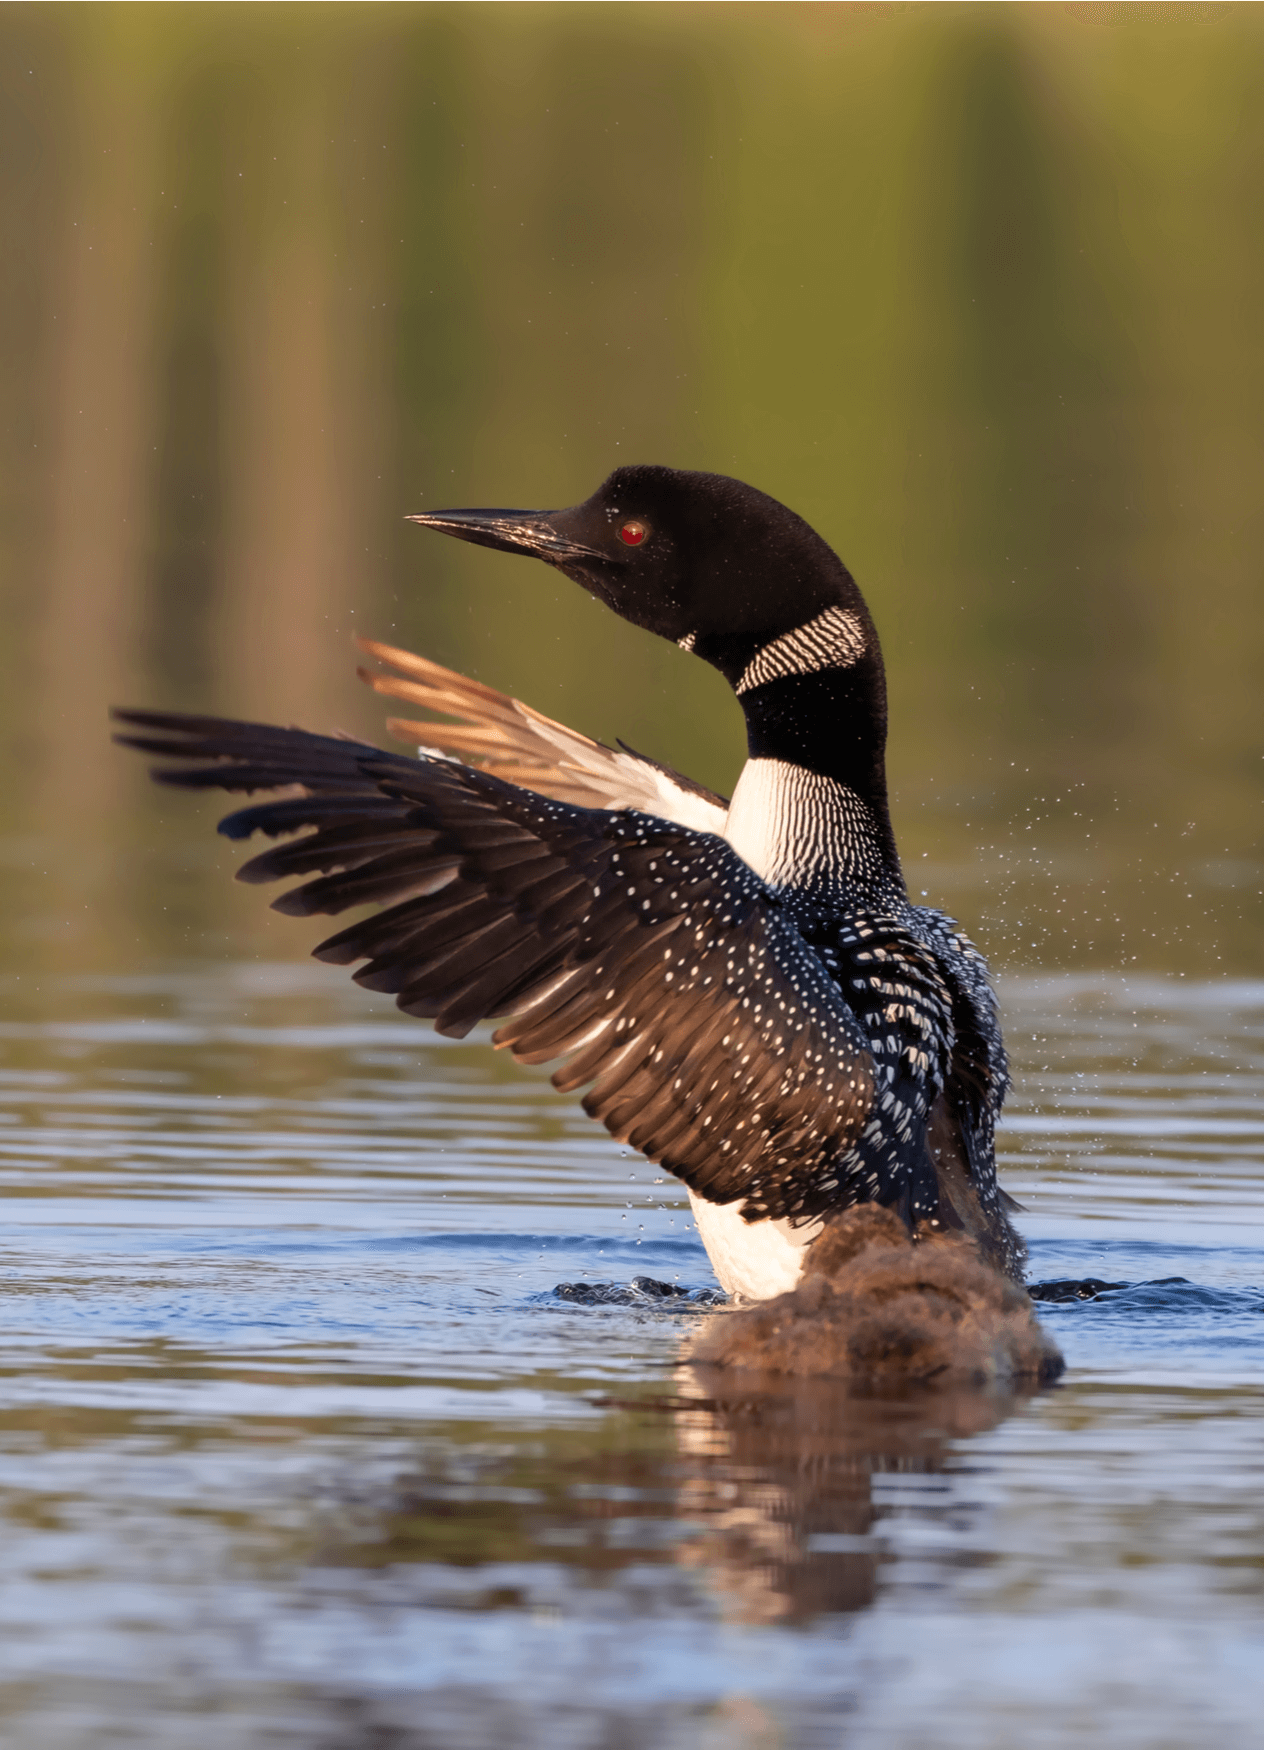 Common loon flapping its wings on the water.